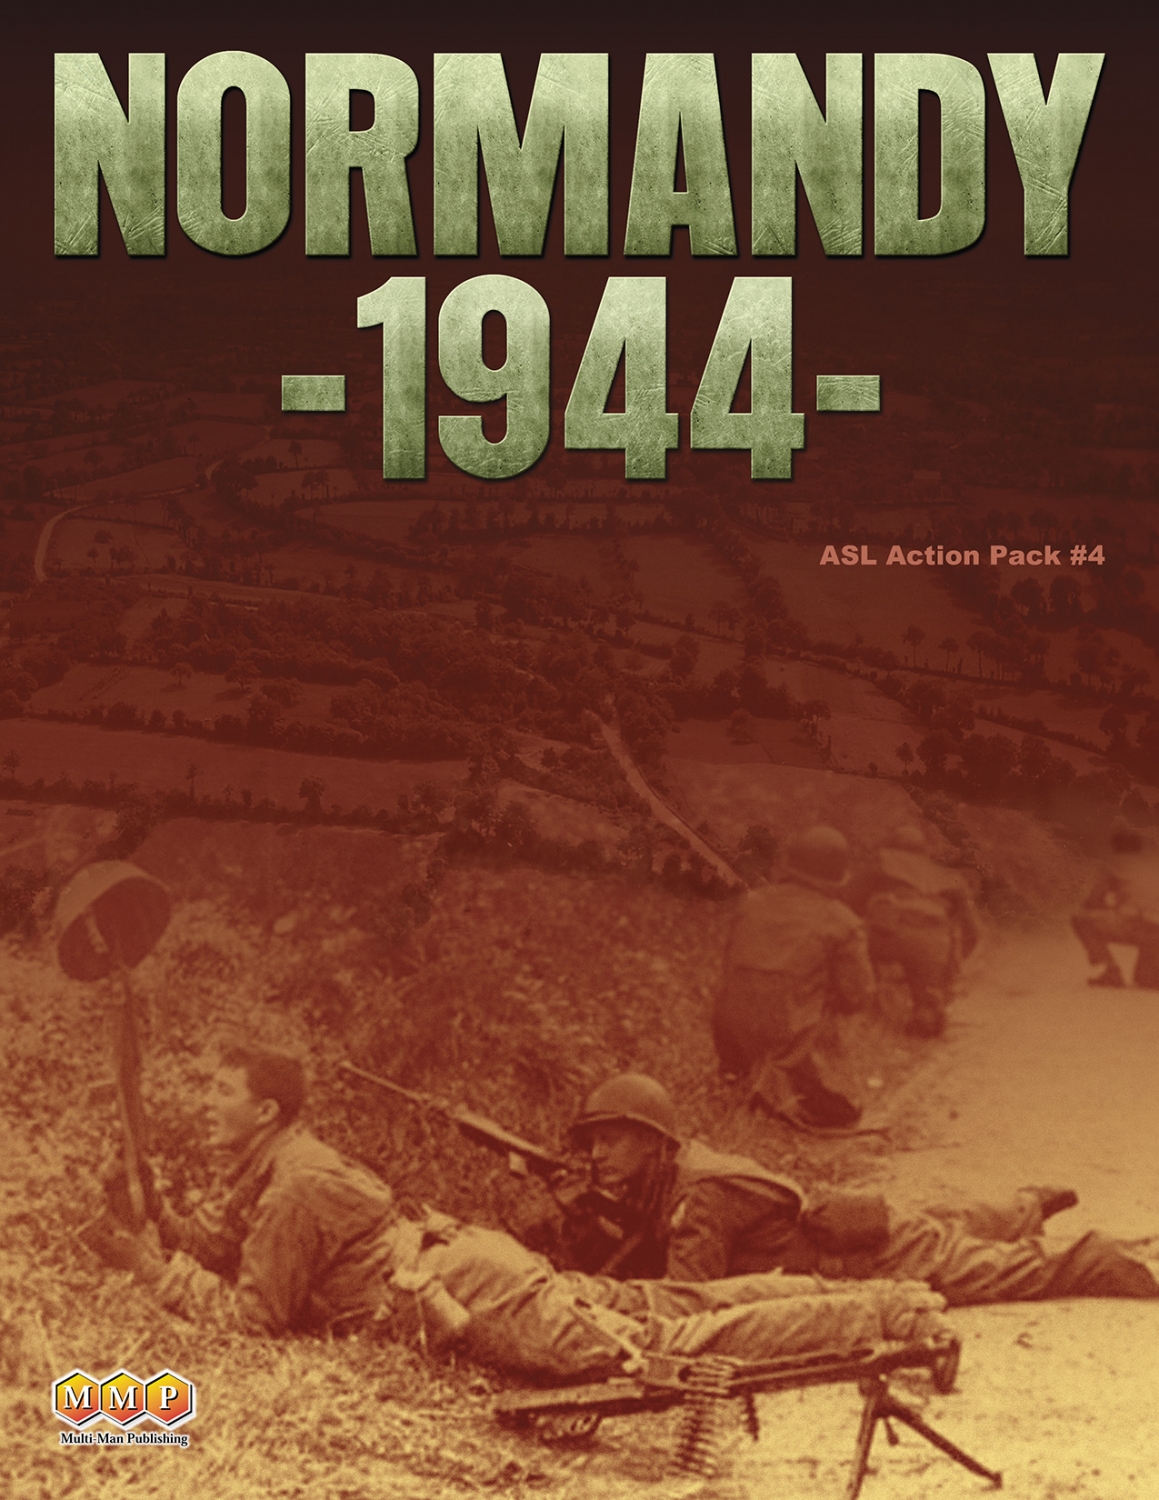 ASL Action Pack #4 - Normandy 1944